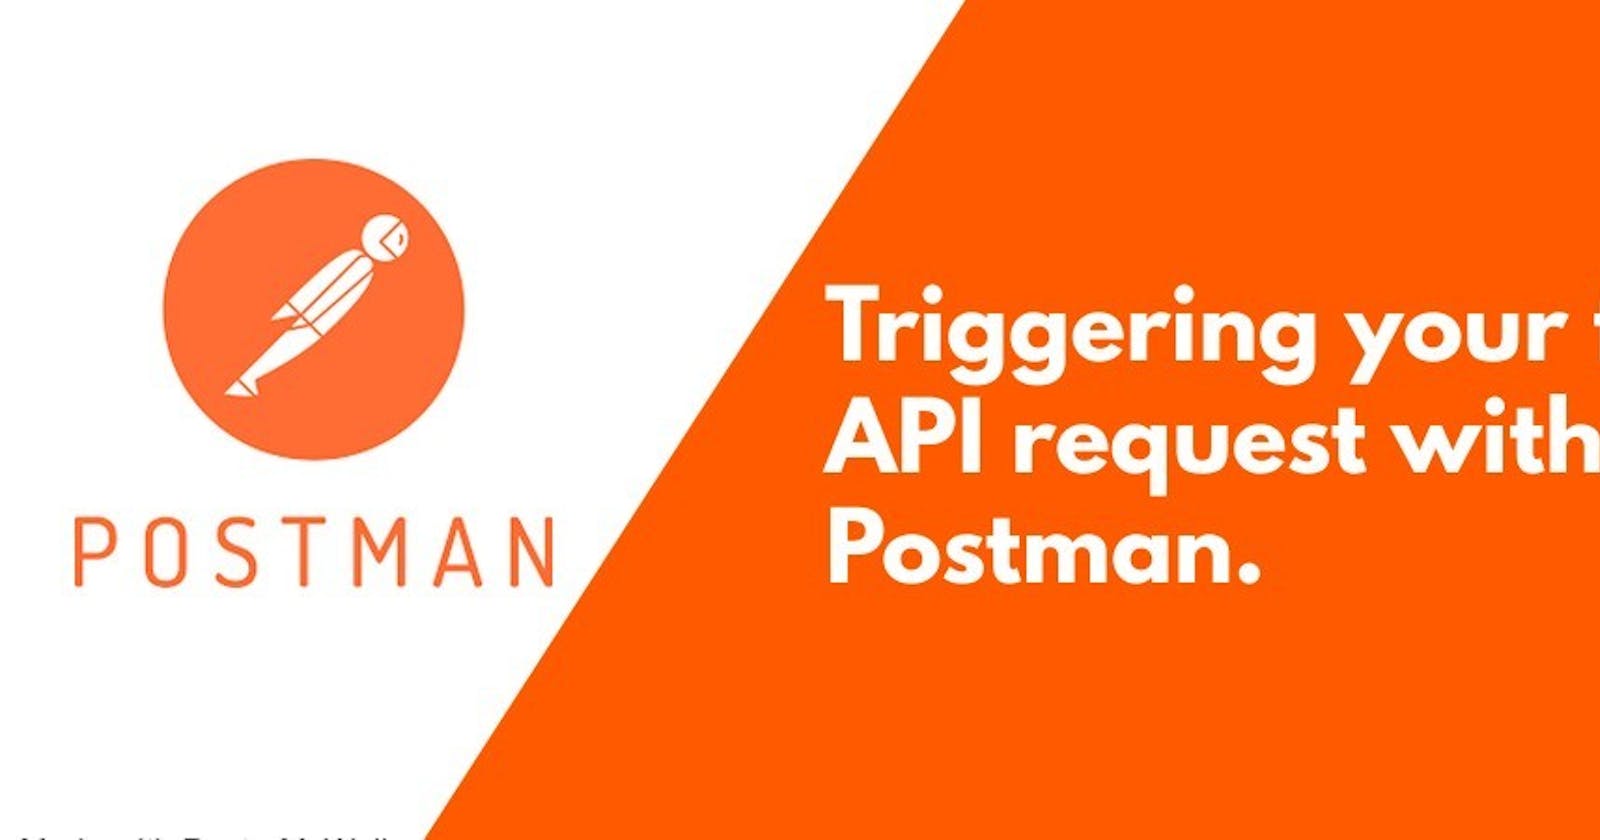 Triggering your first API request with Postman.